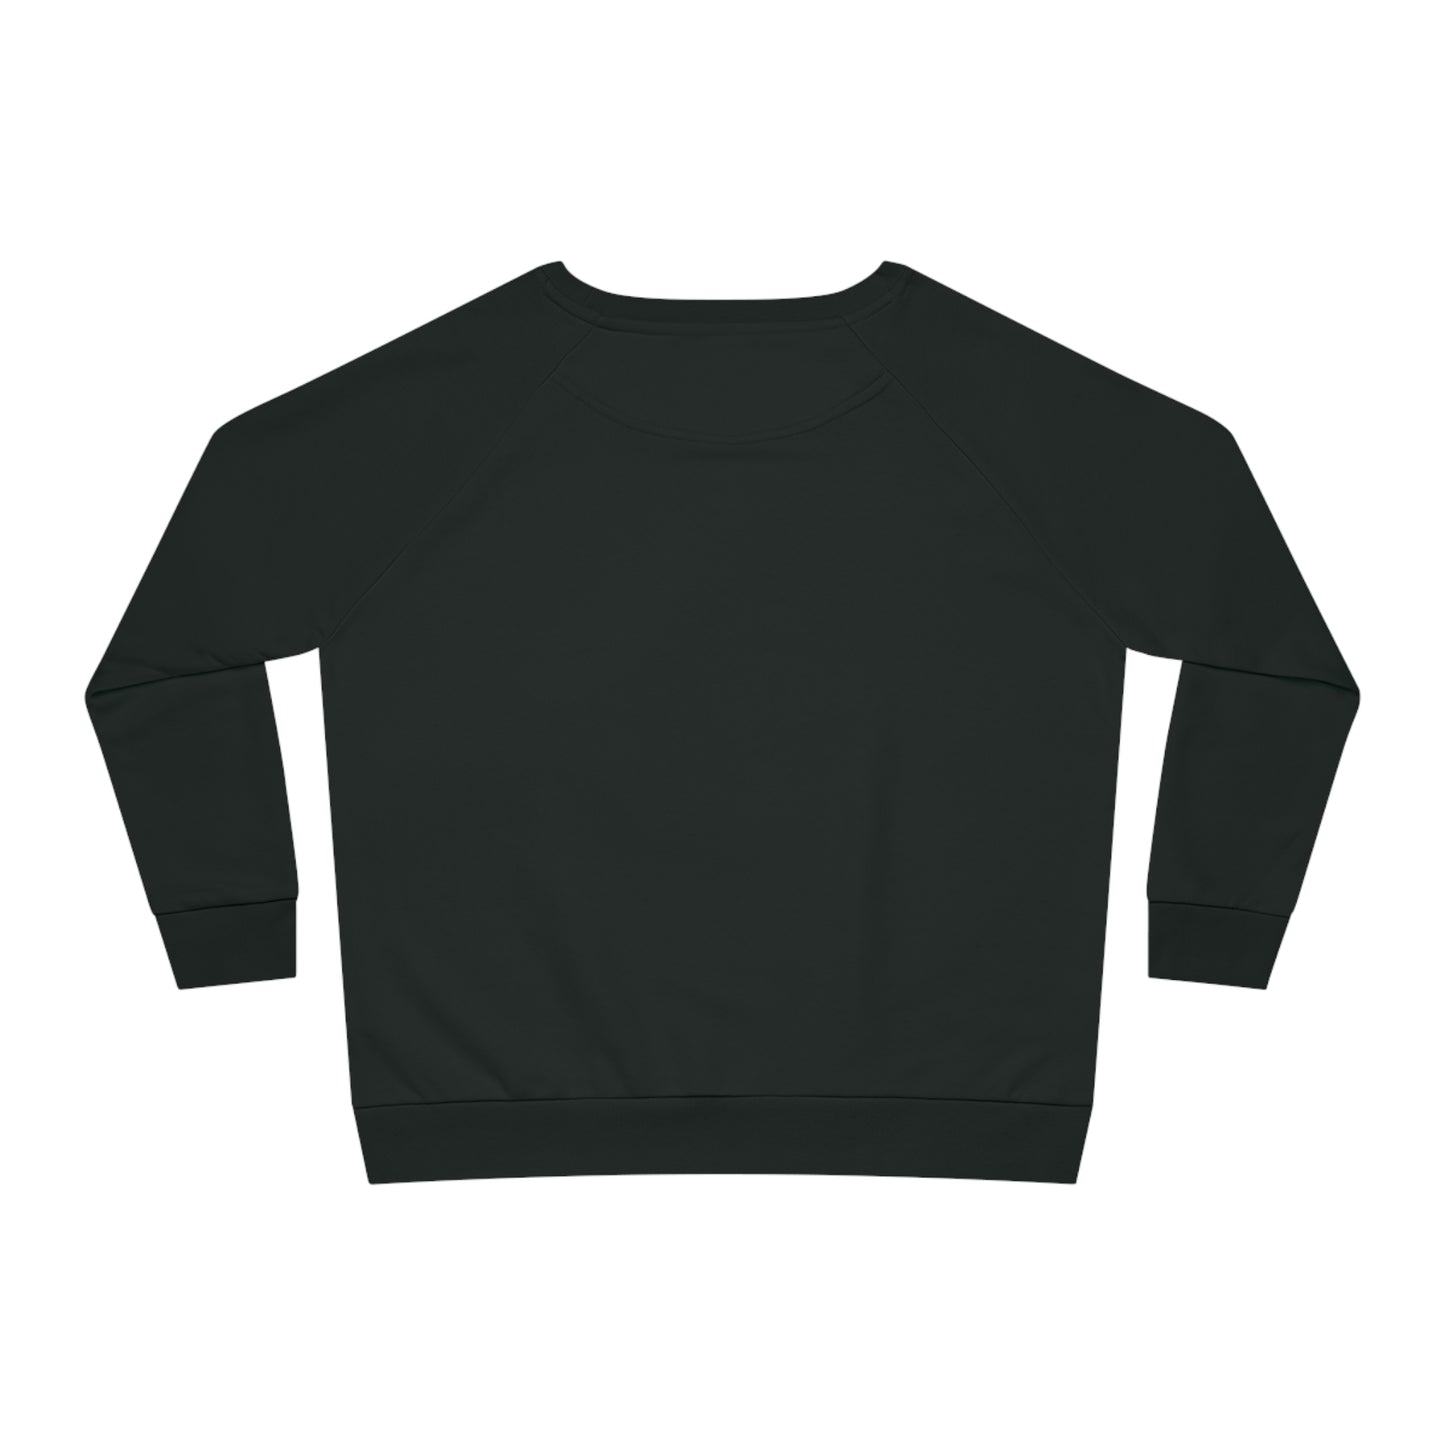 Eco-Friendly Organic - Women's Dazzler Relaxed Fit Sweatshirt - International Day of Forests graphic